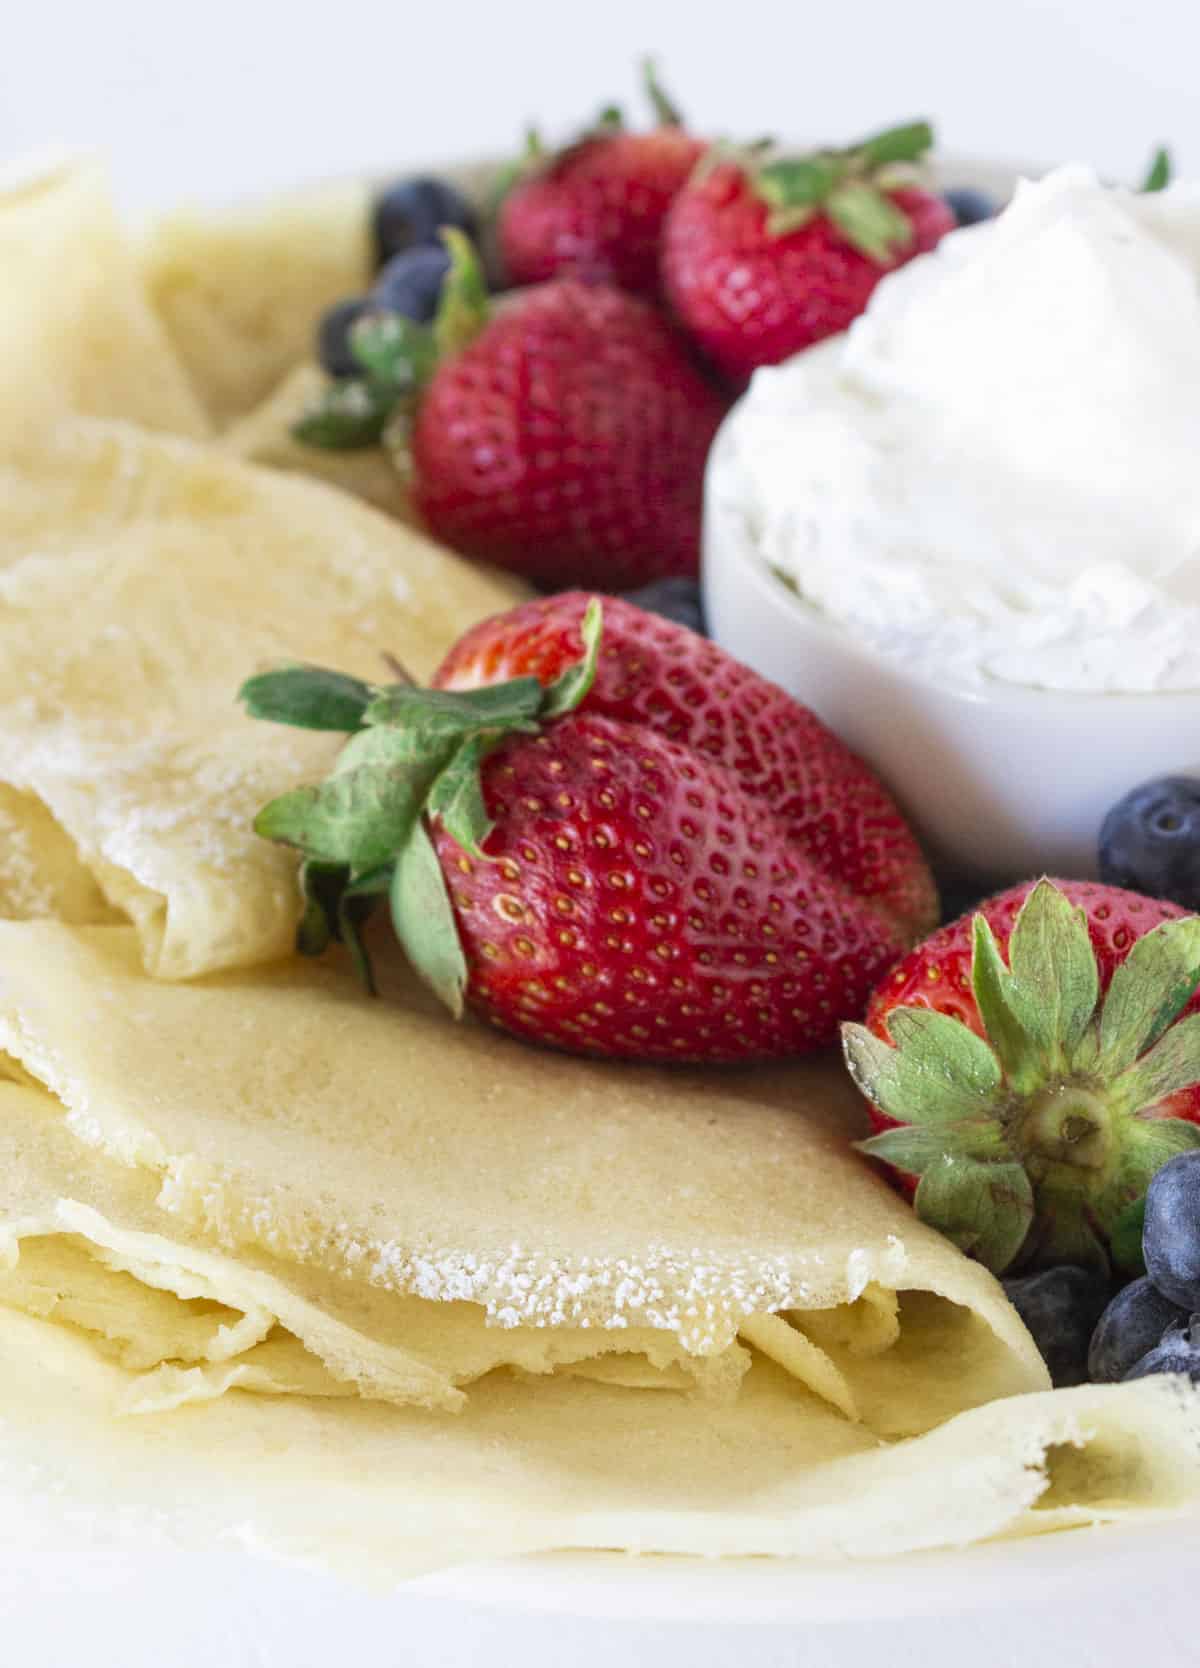 A plate full of pancake mix crepes, fresh fruit and whipped cream.